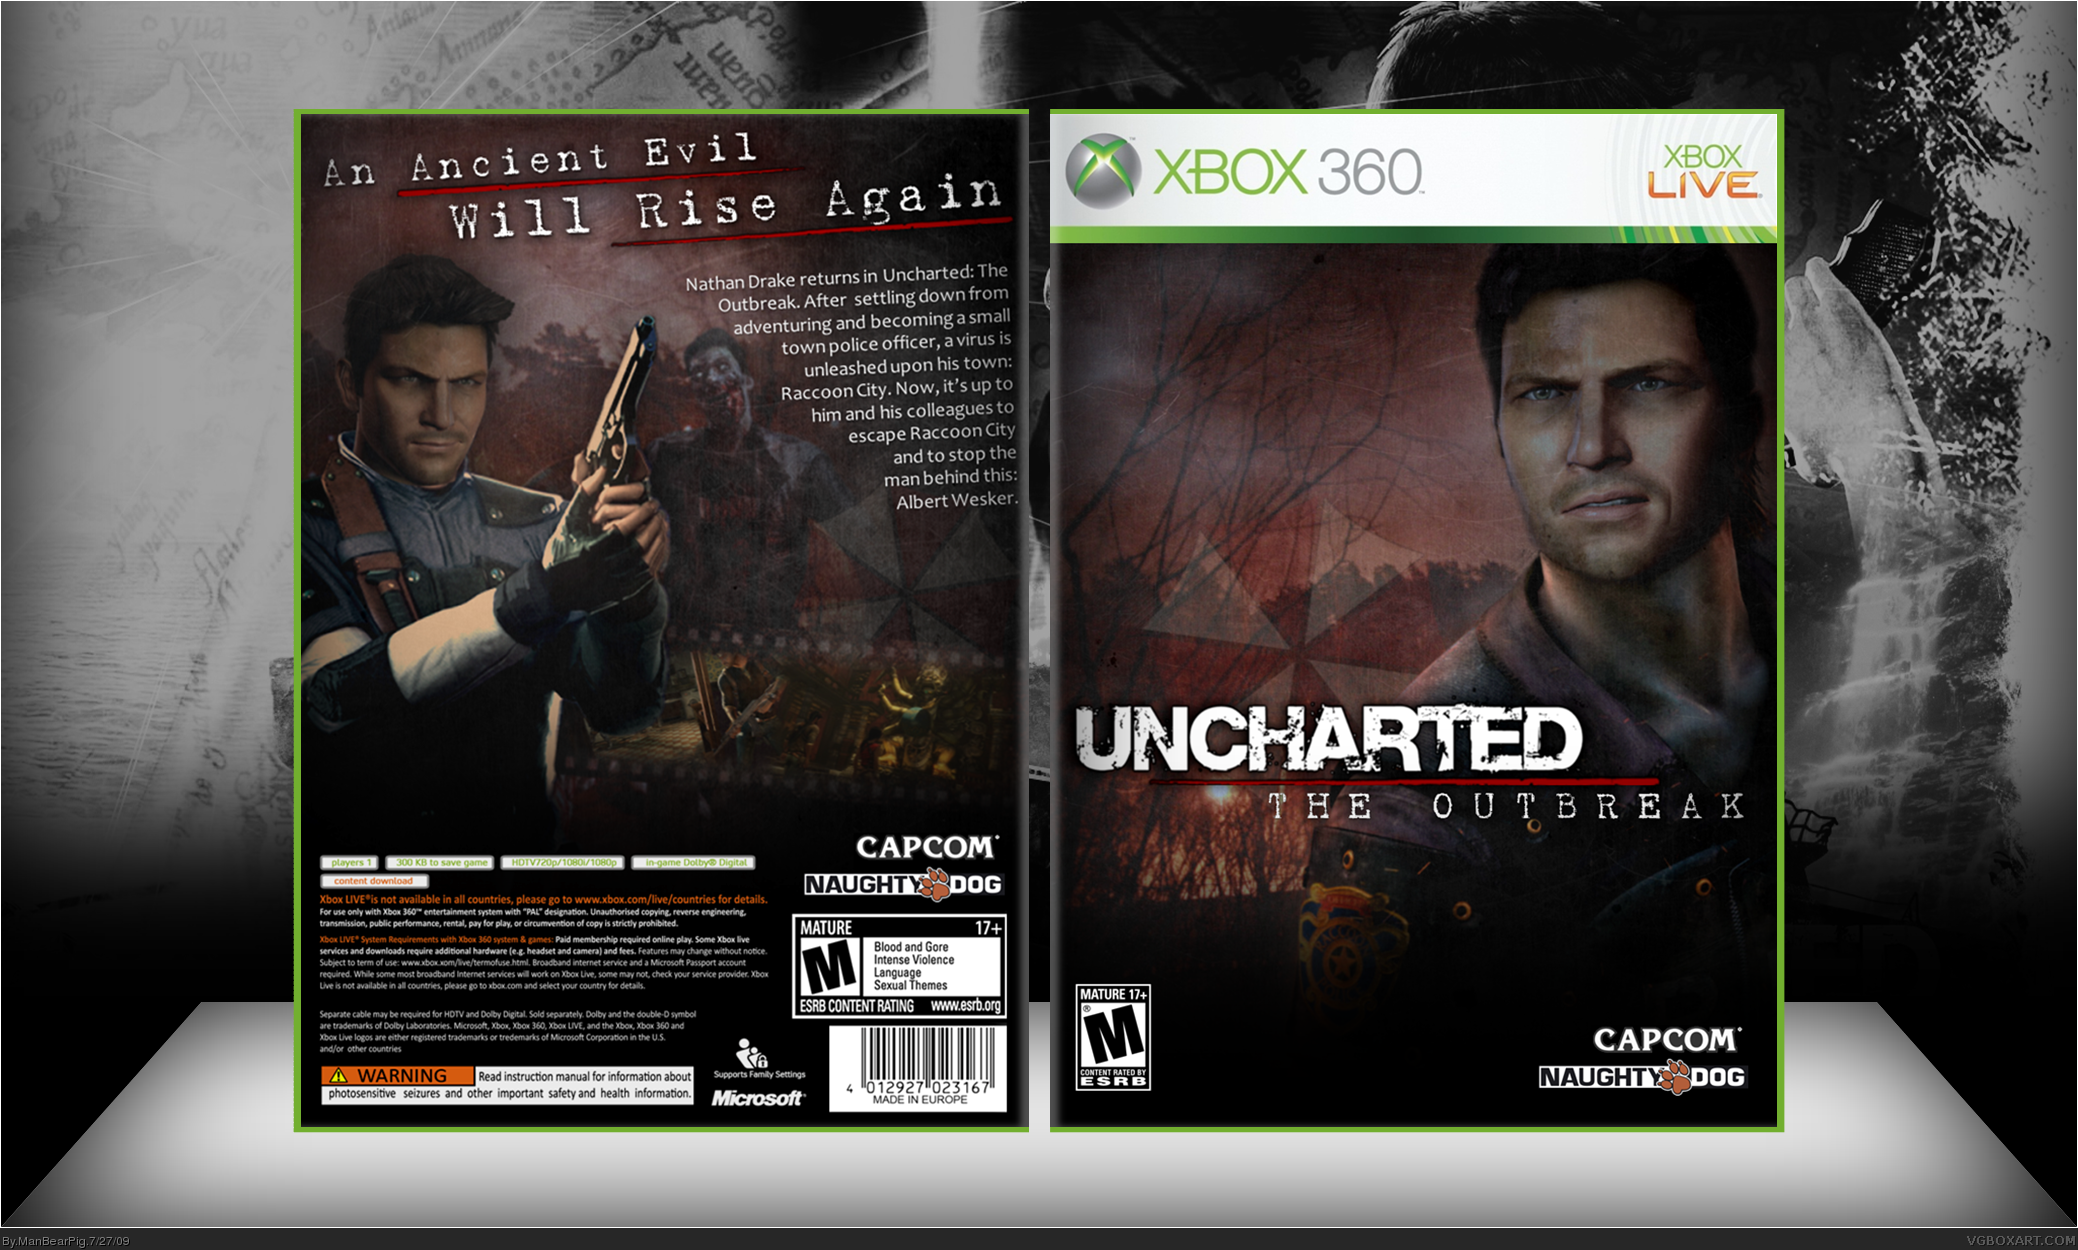 Uncharted: The Outbreak box cover